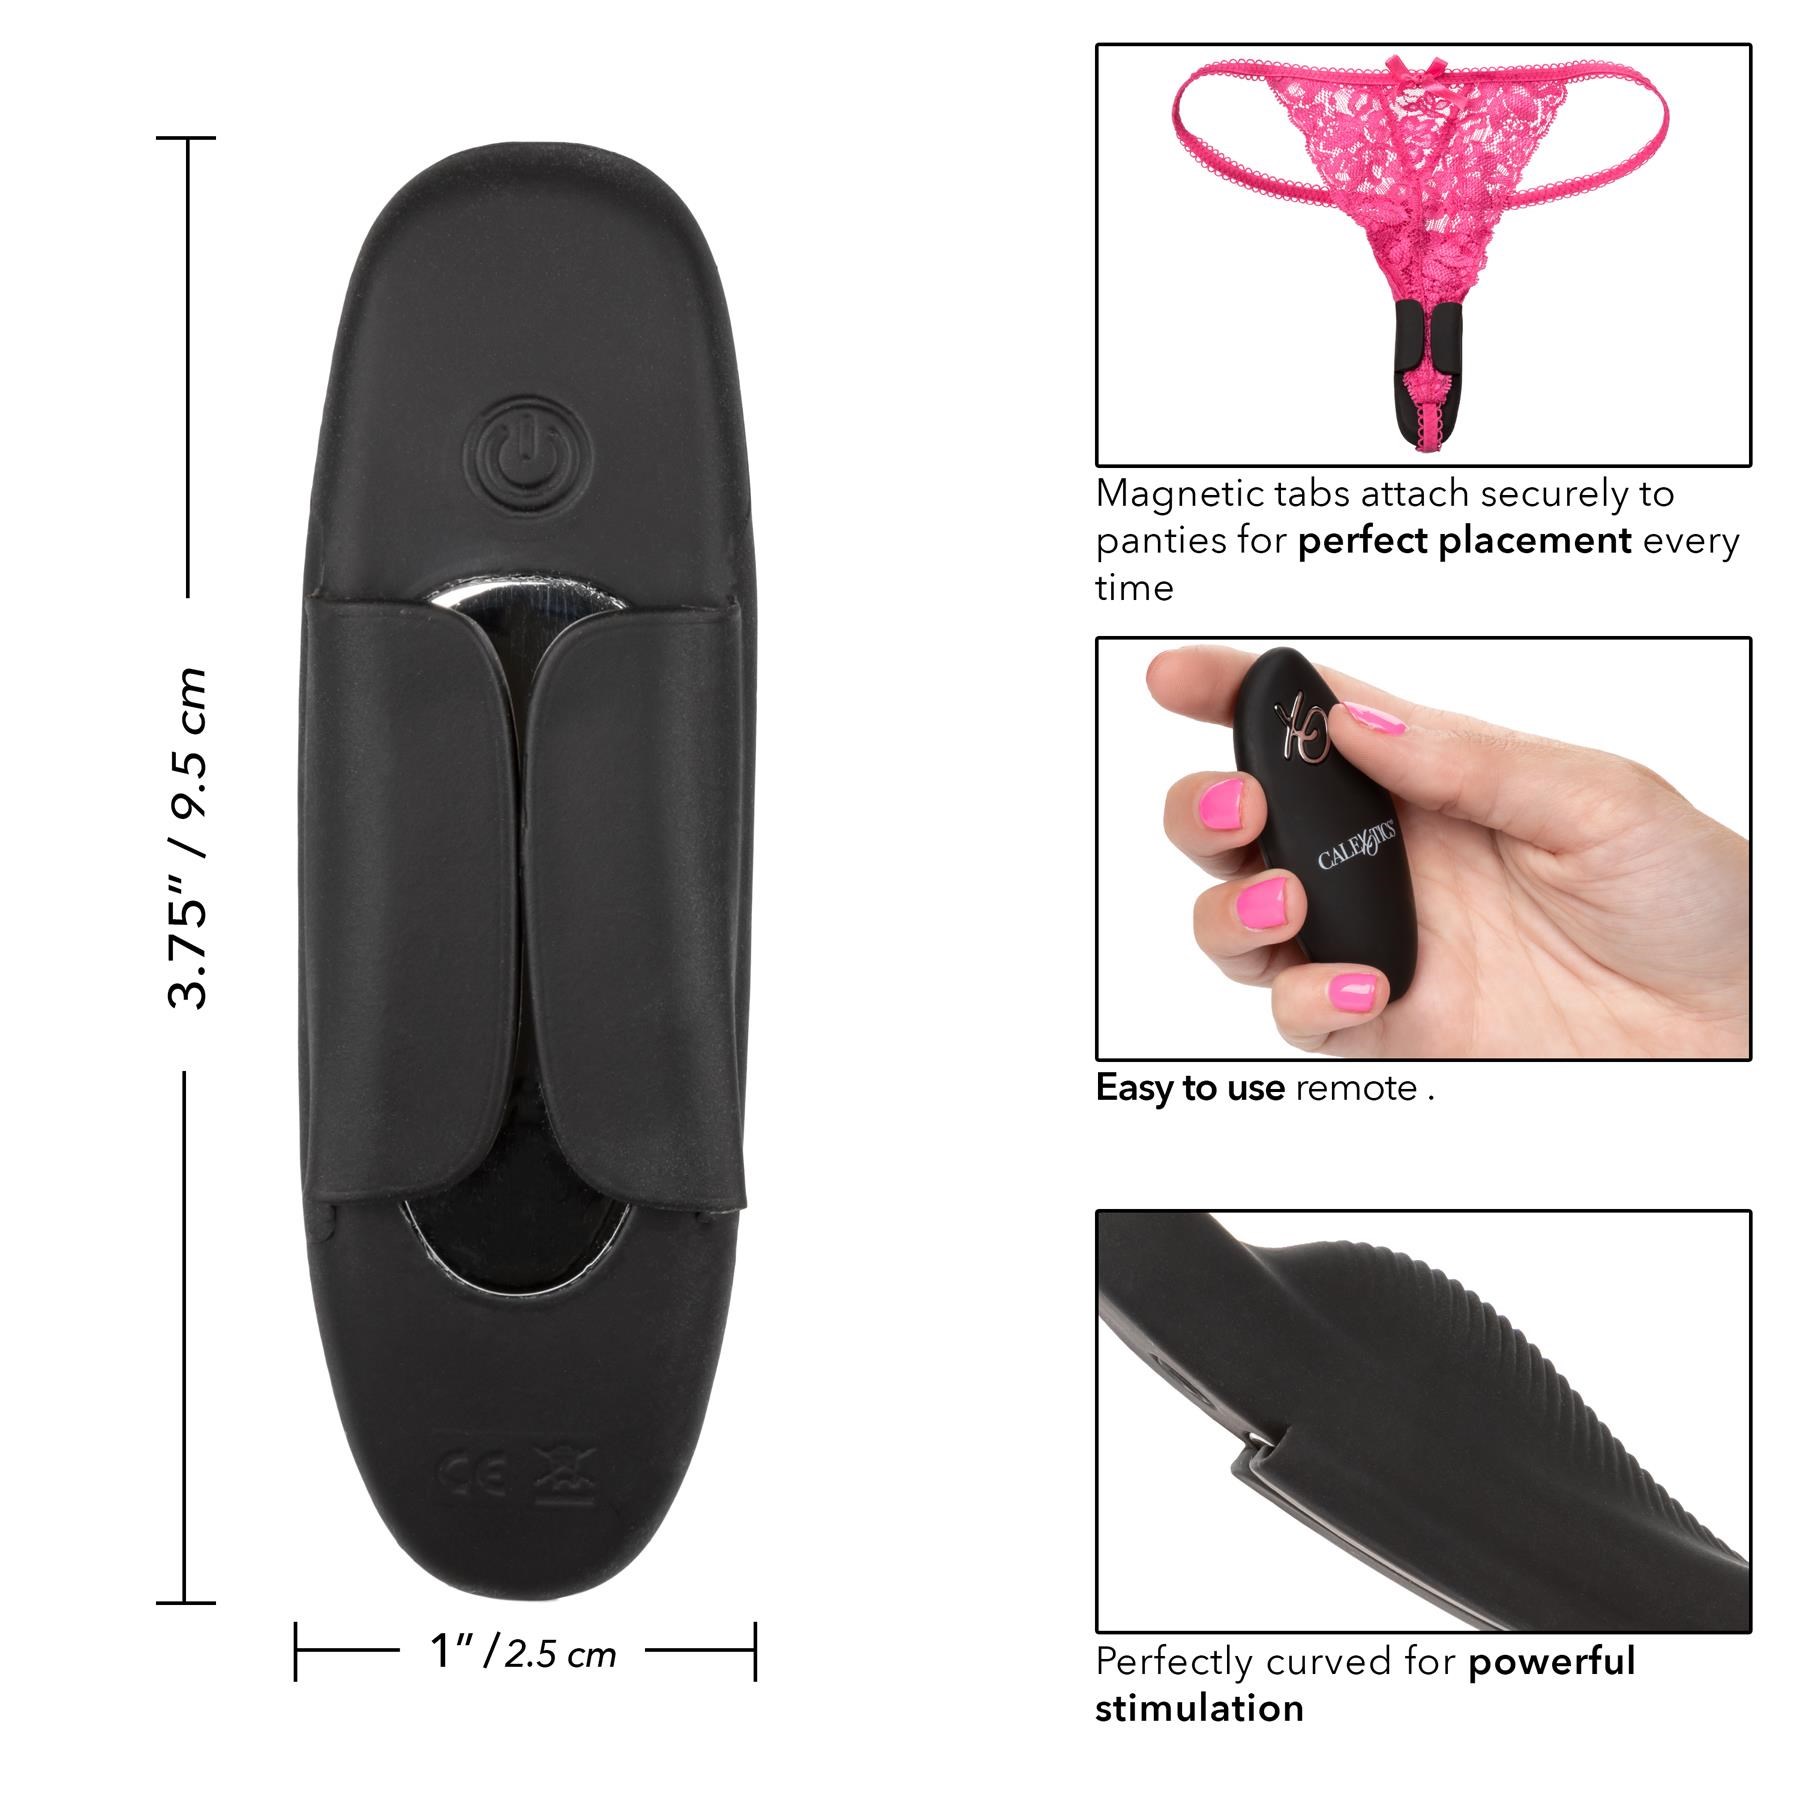 Lock-N-Play Remote Petite Panty Teaser - Instructions and Dimensions